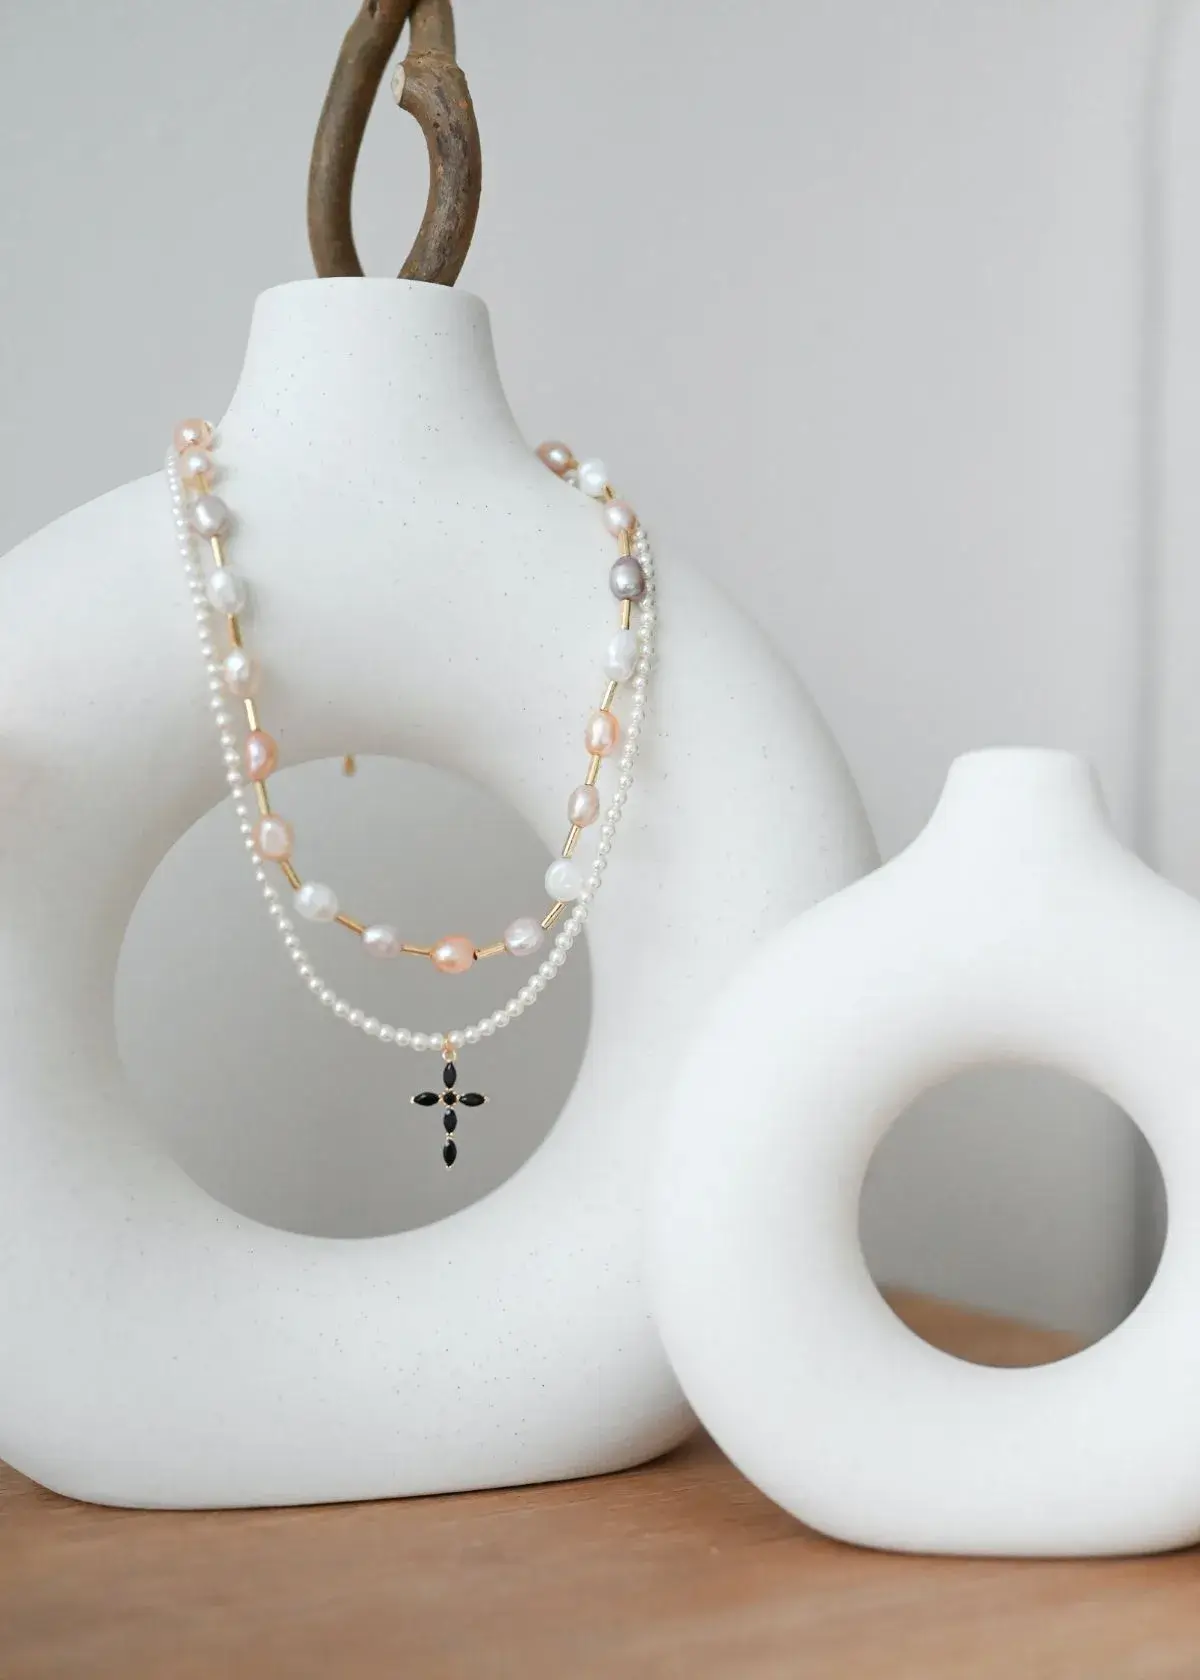 Why do Guys like Pearl Necklaces?